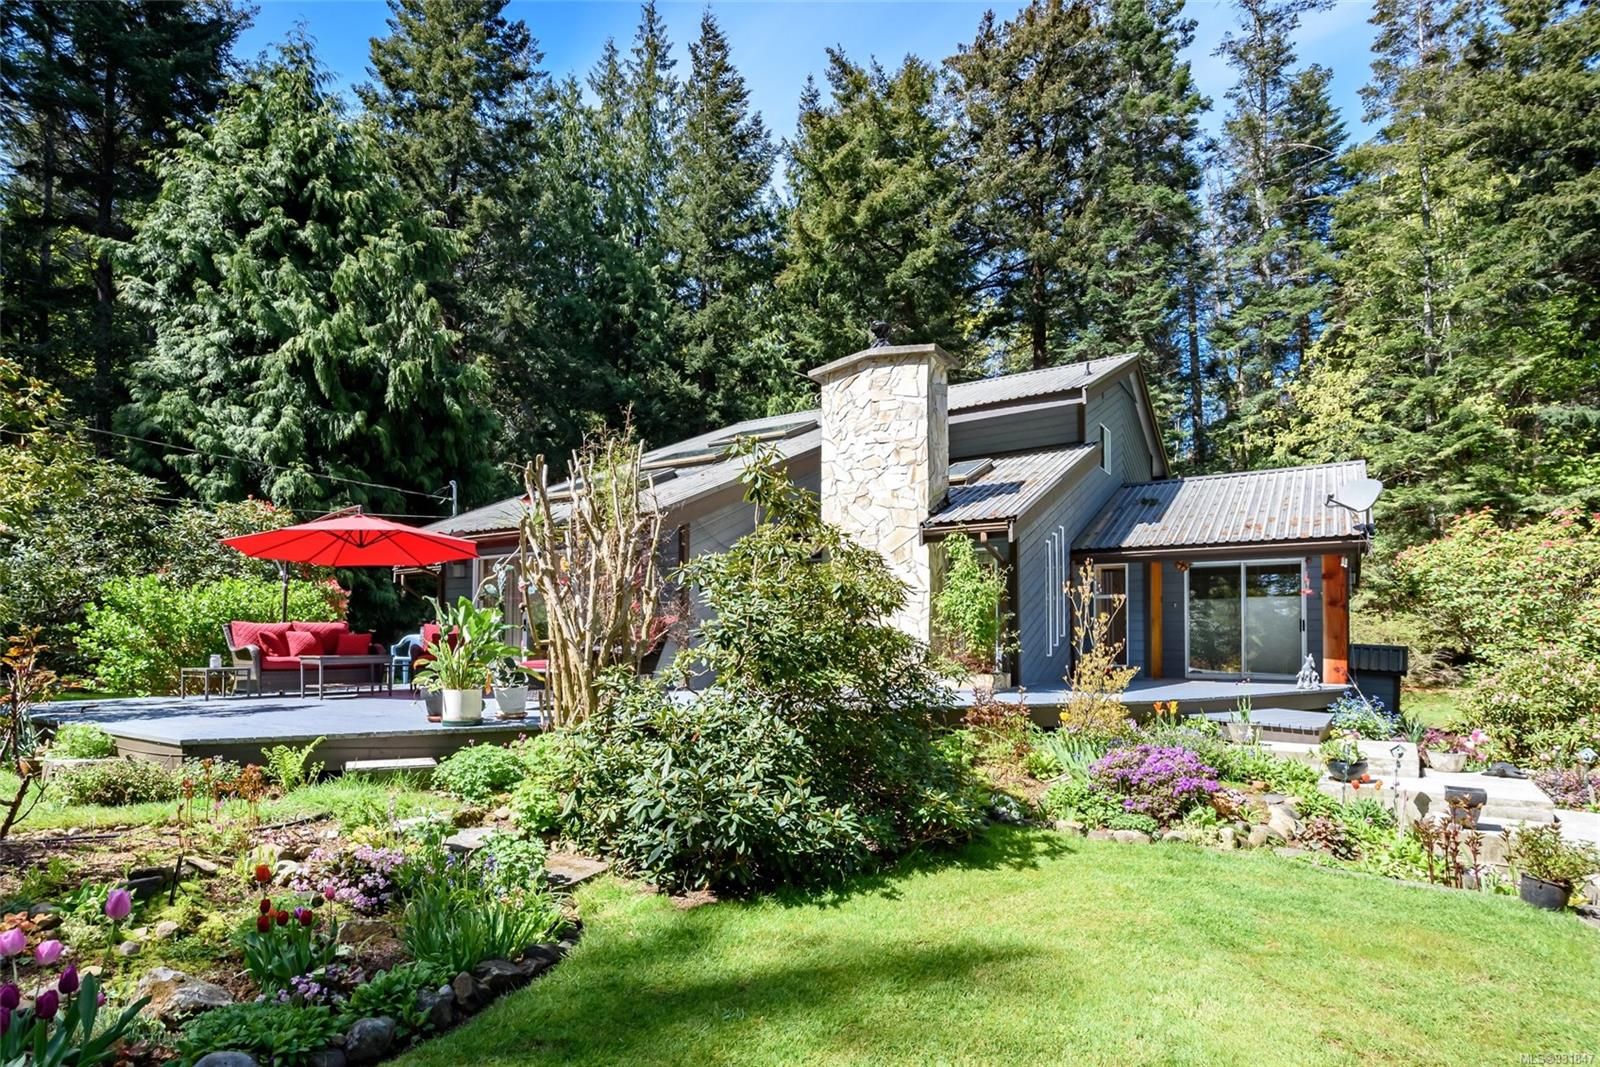 I have sold a property at 335 Morland Rd in Comox
